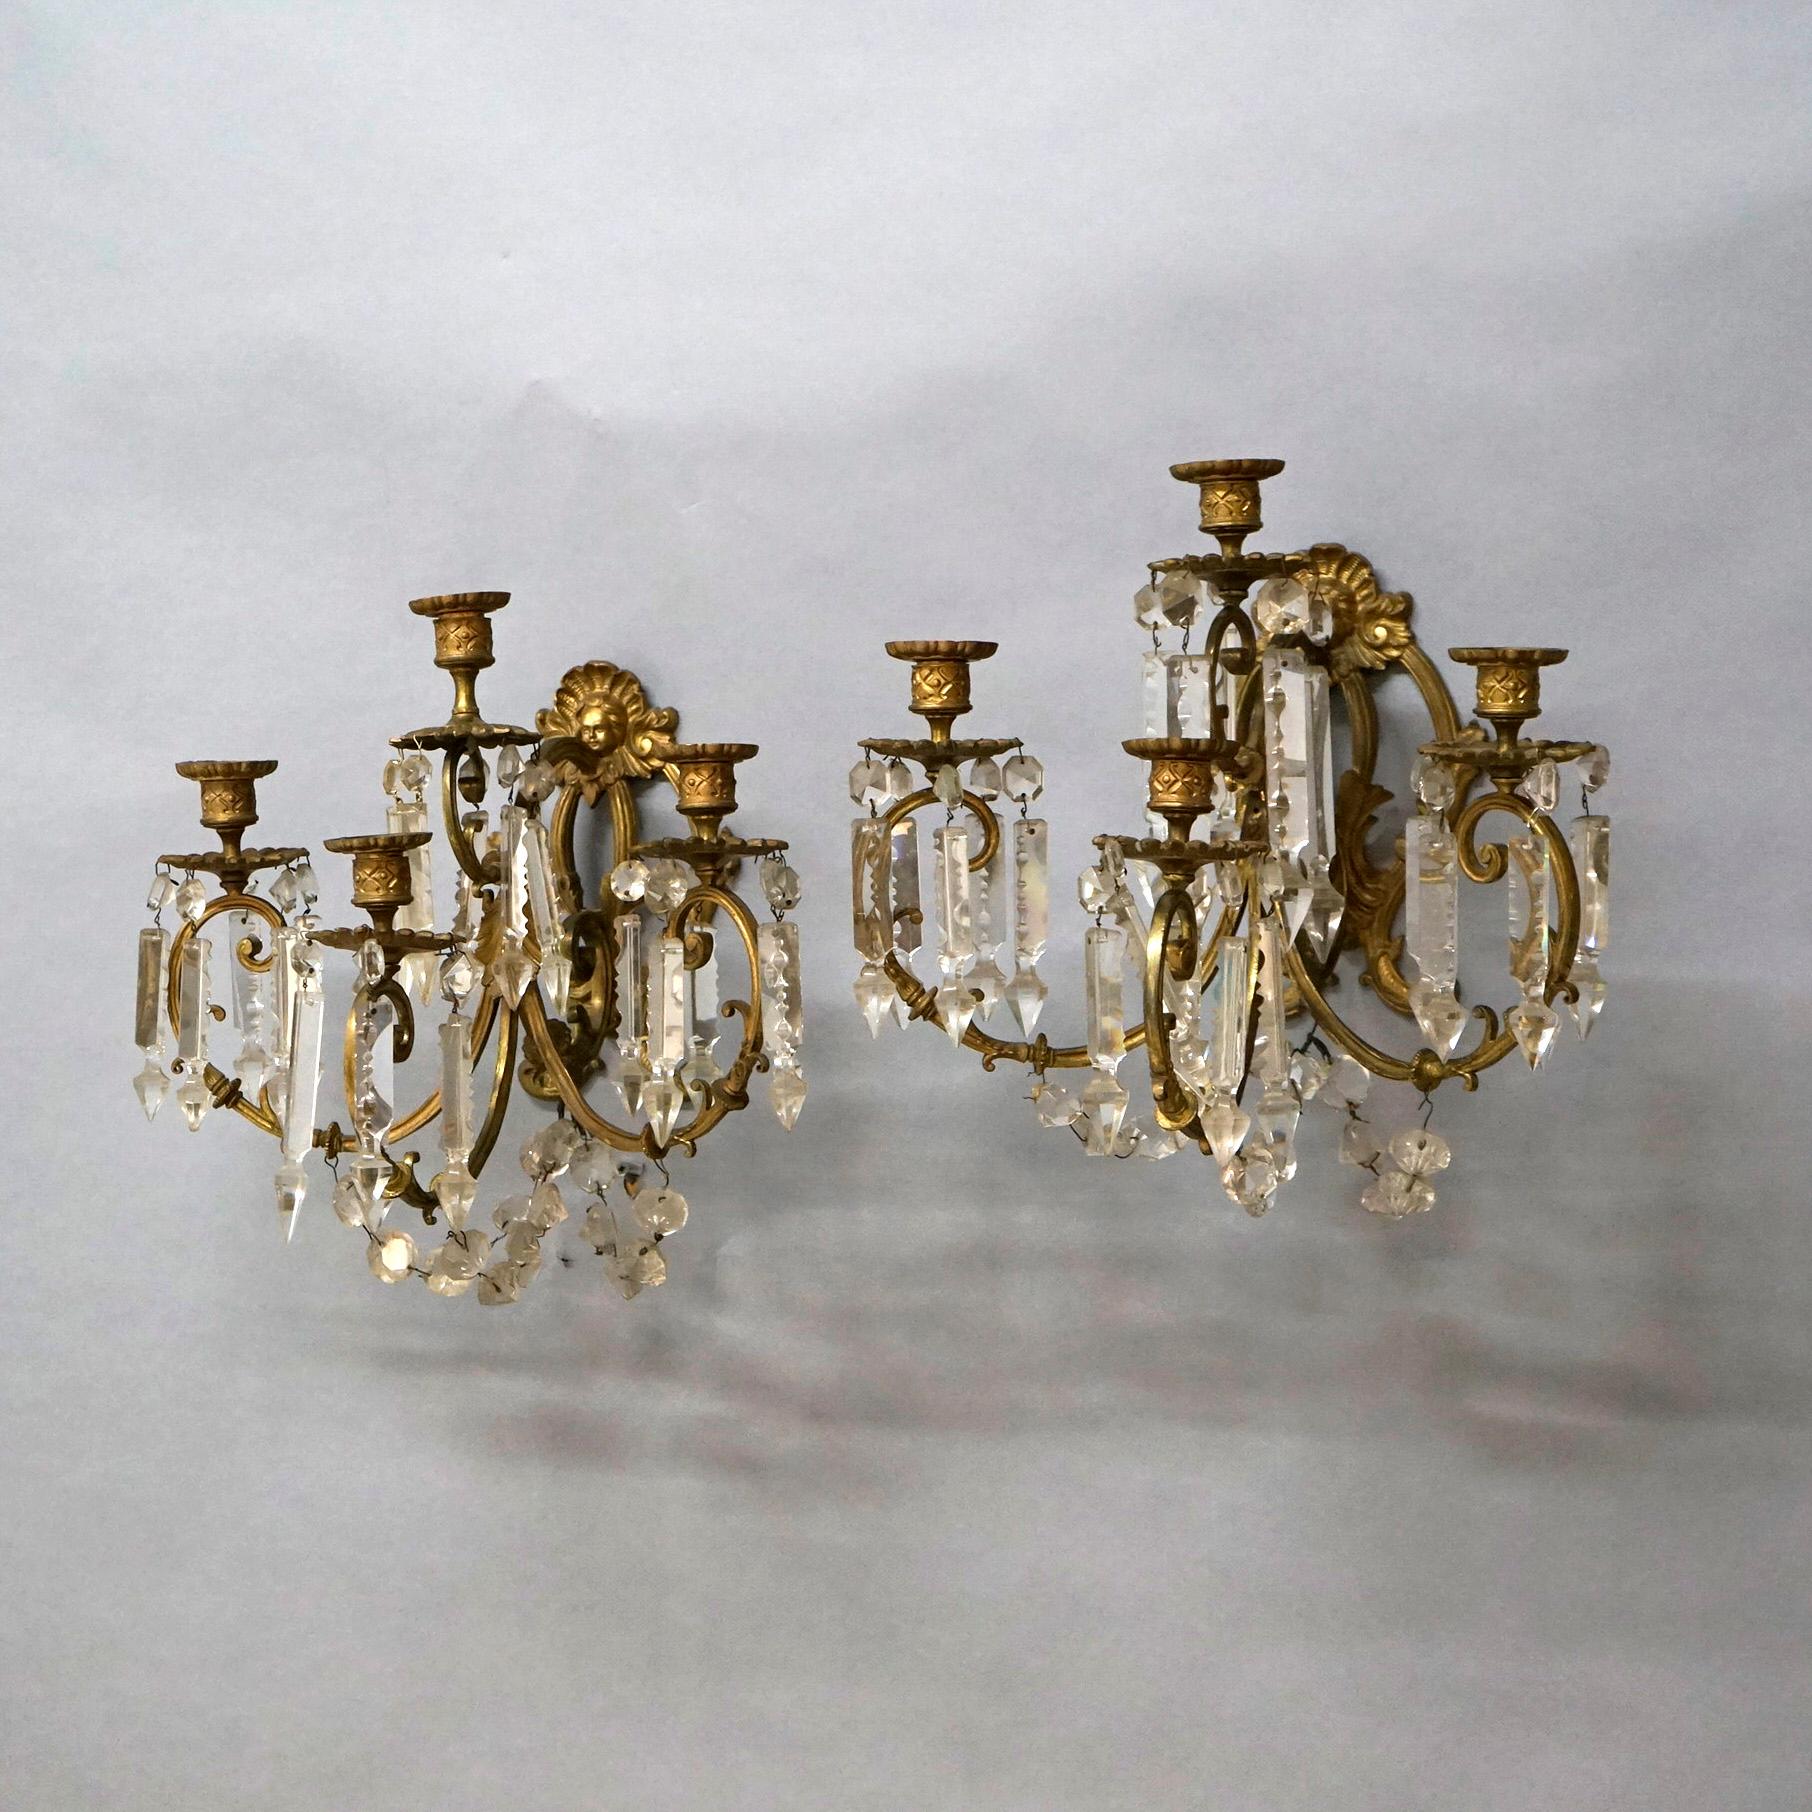 An antique pair of French wall sconces offer cast and gilt bronze construction with central cherub masks, three scroll form arms terminating in candle sockets, and cut crystal highlights throughout, 19th century

Measures- 13.5''H x 14''W x 12.75''D